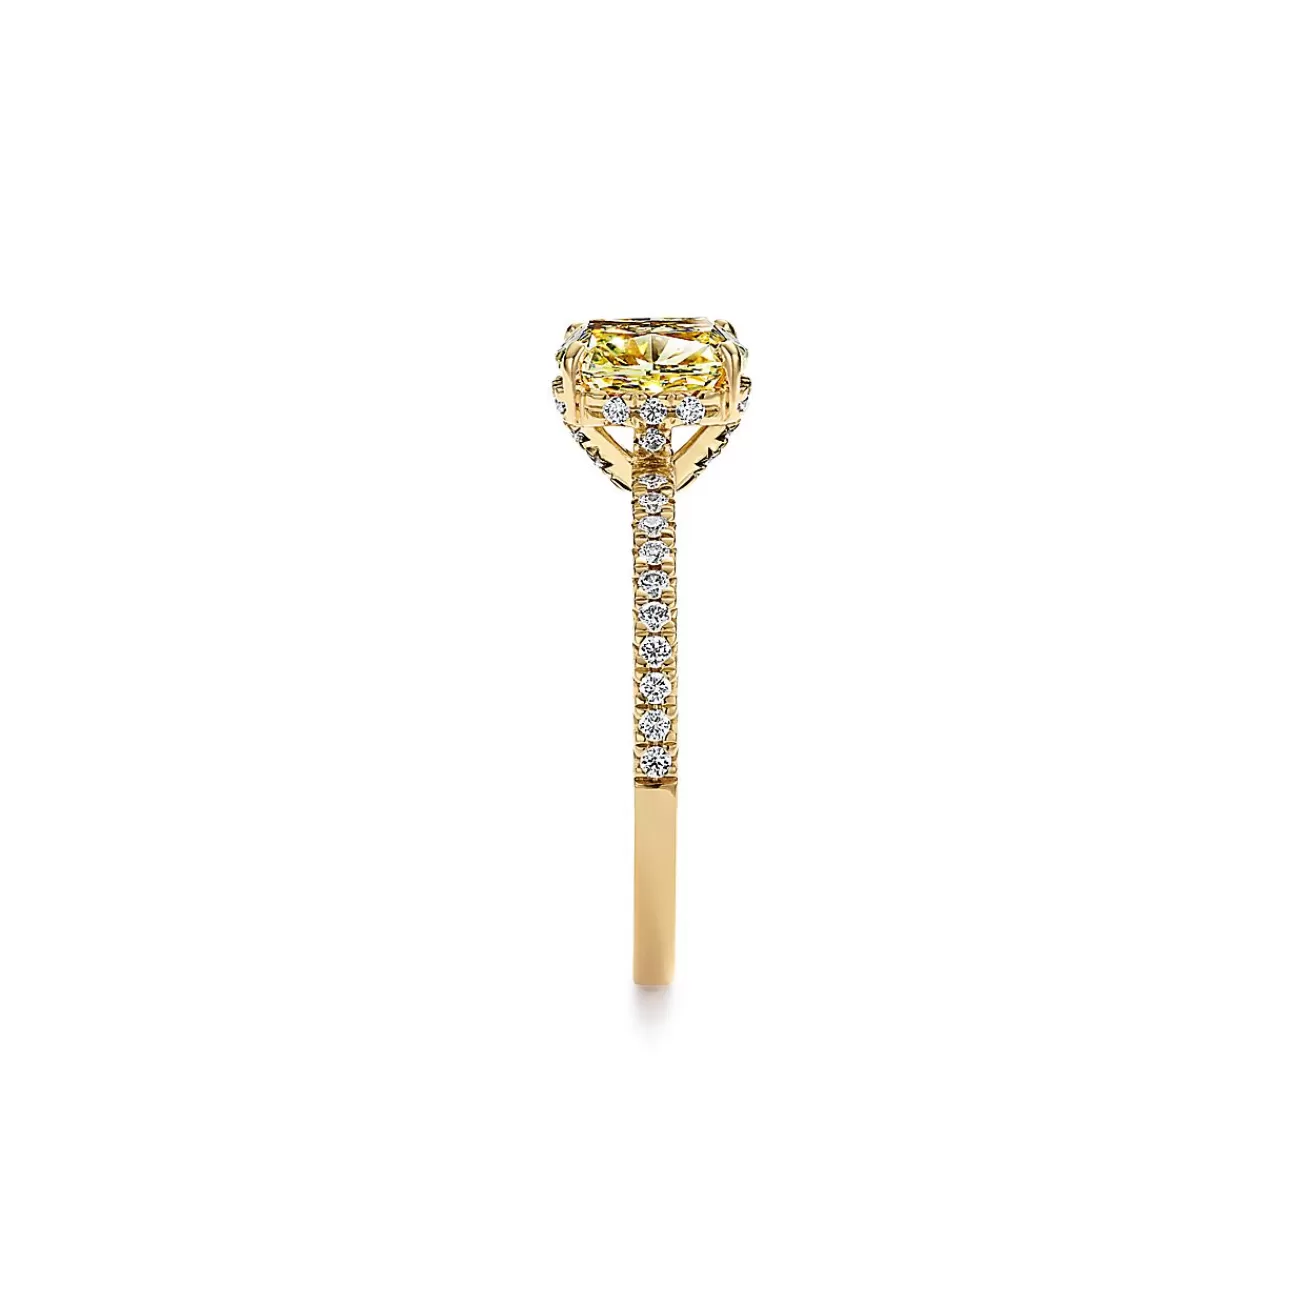 Tiffany & Co. Tiffany True® engagement ring in 18k yellow gold: an icon of modern love. | ^ Engagement Rings